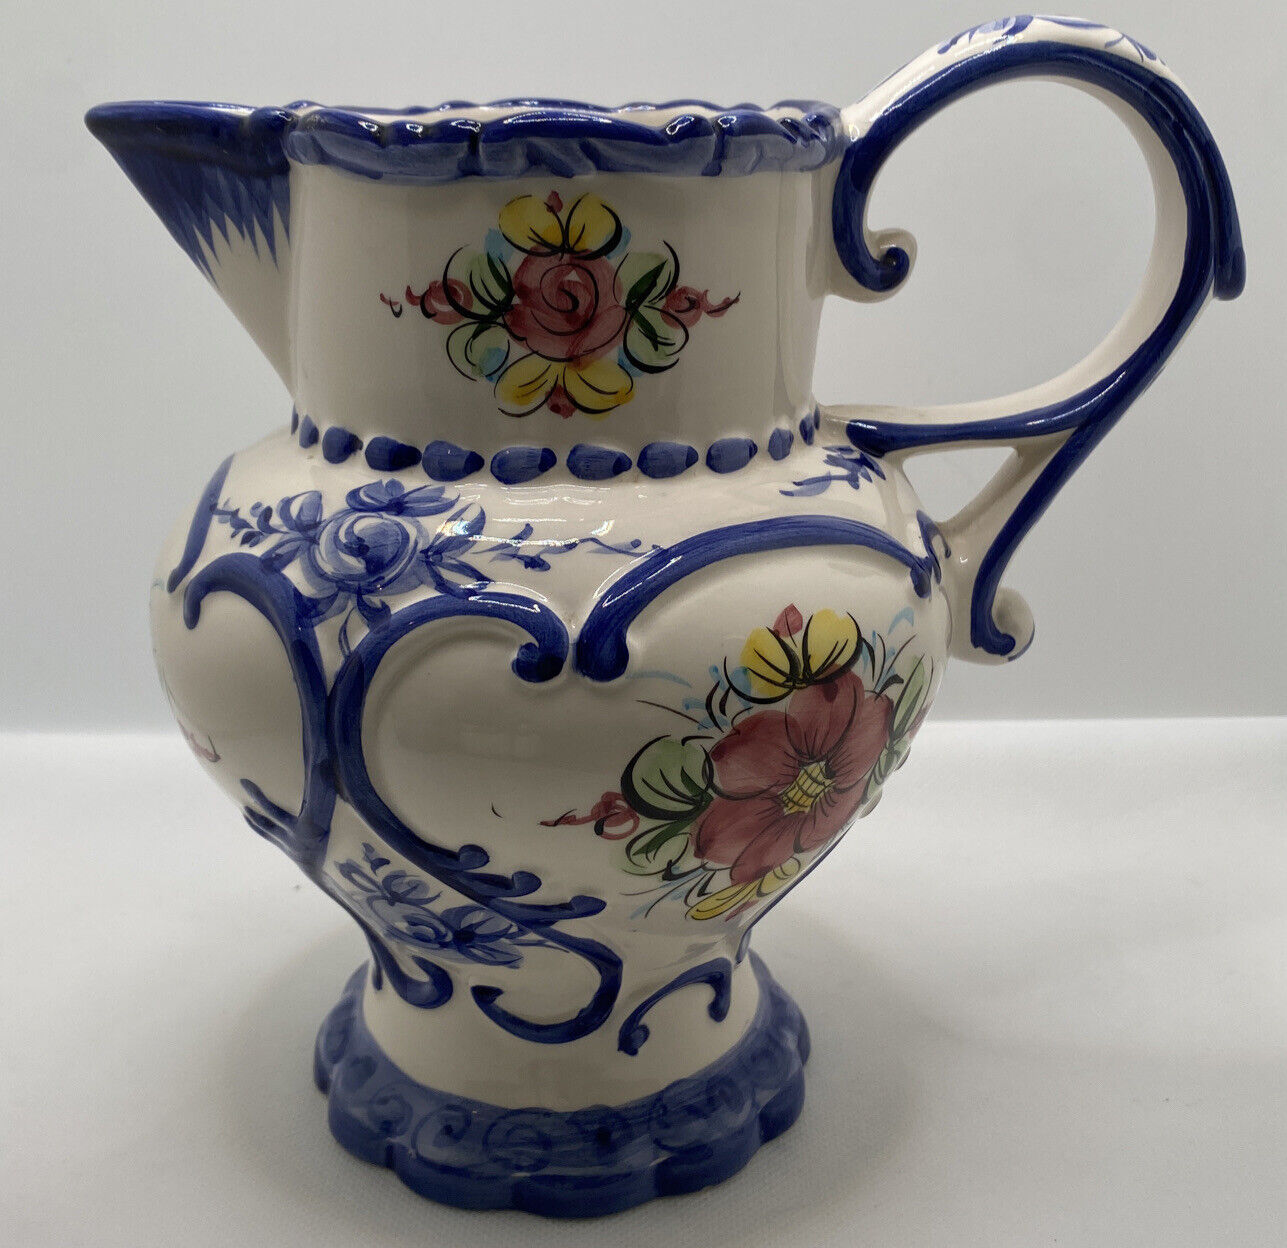 Vintage Vestal Alcobaca Portugal Collectible Pitcher Hand-Painted